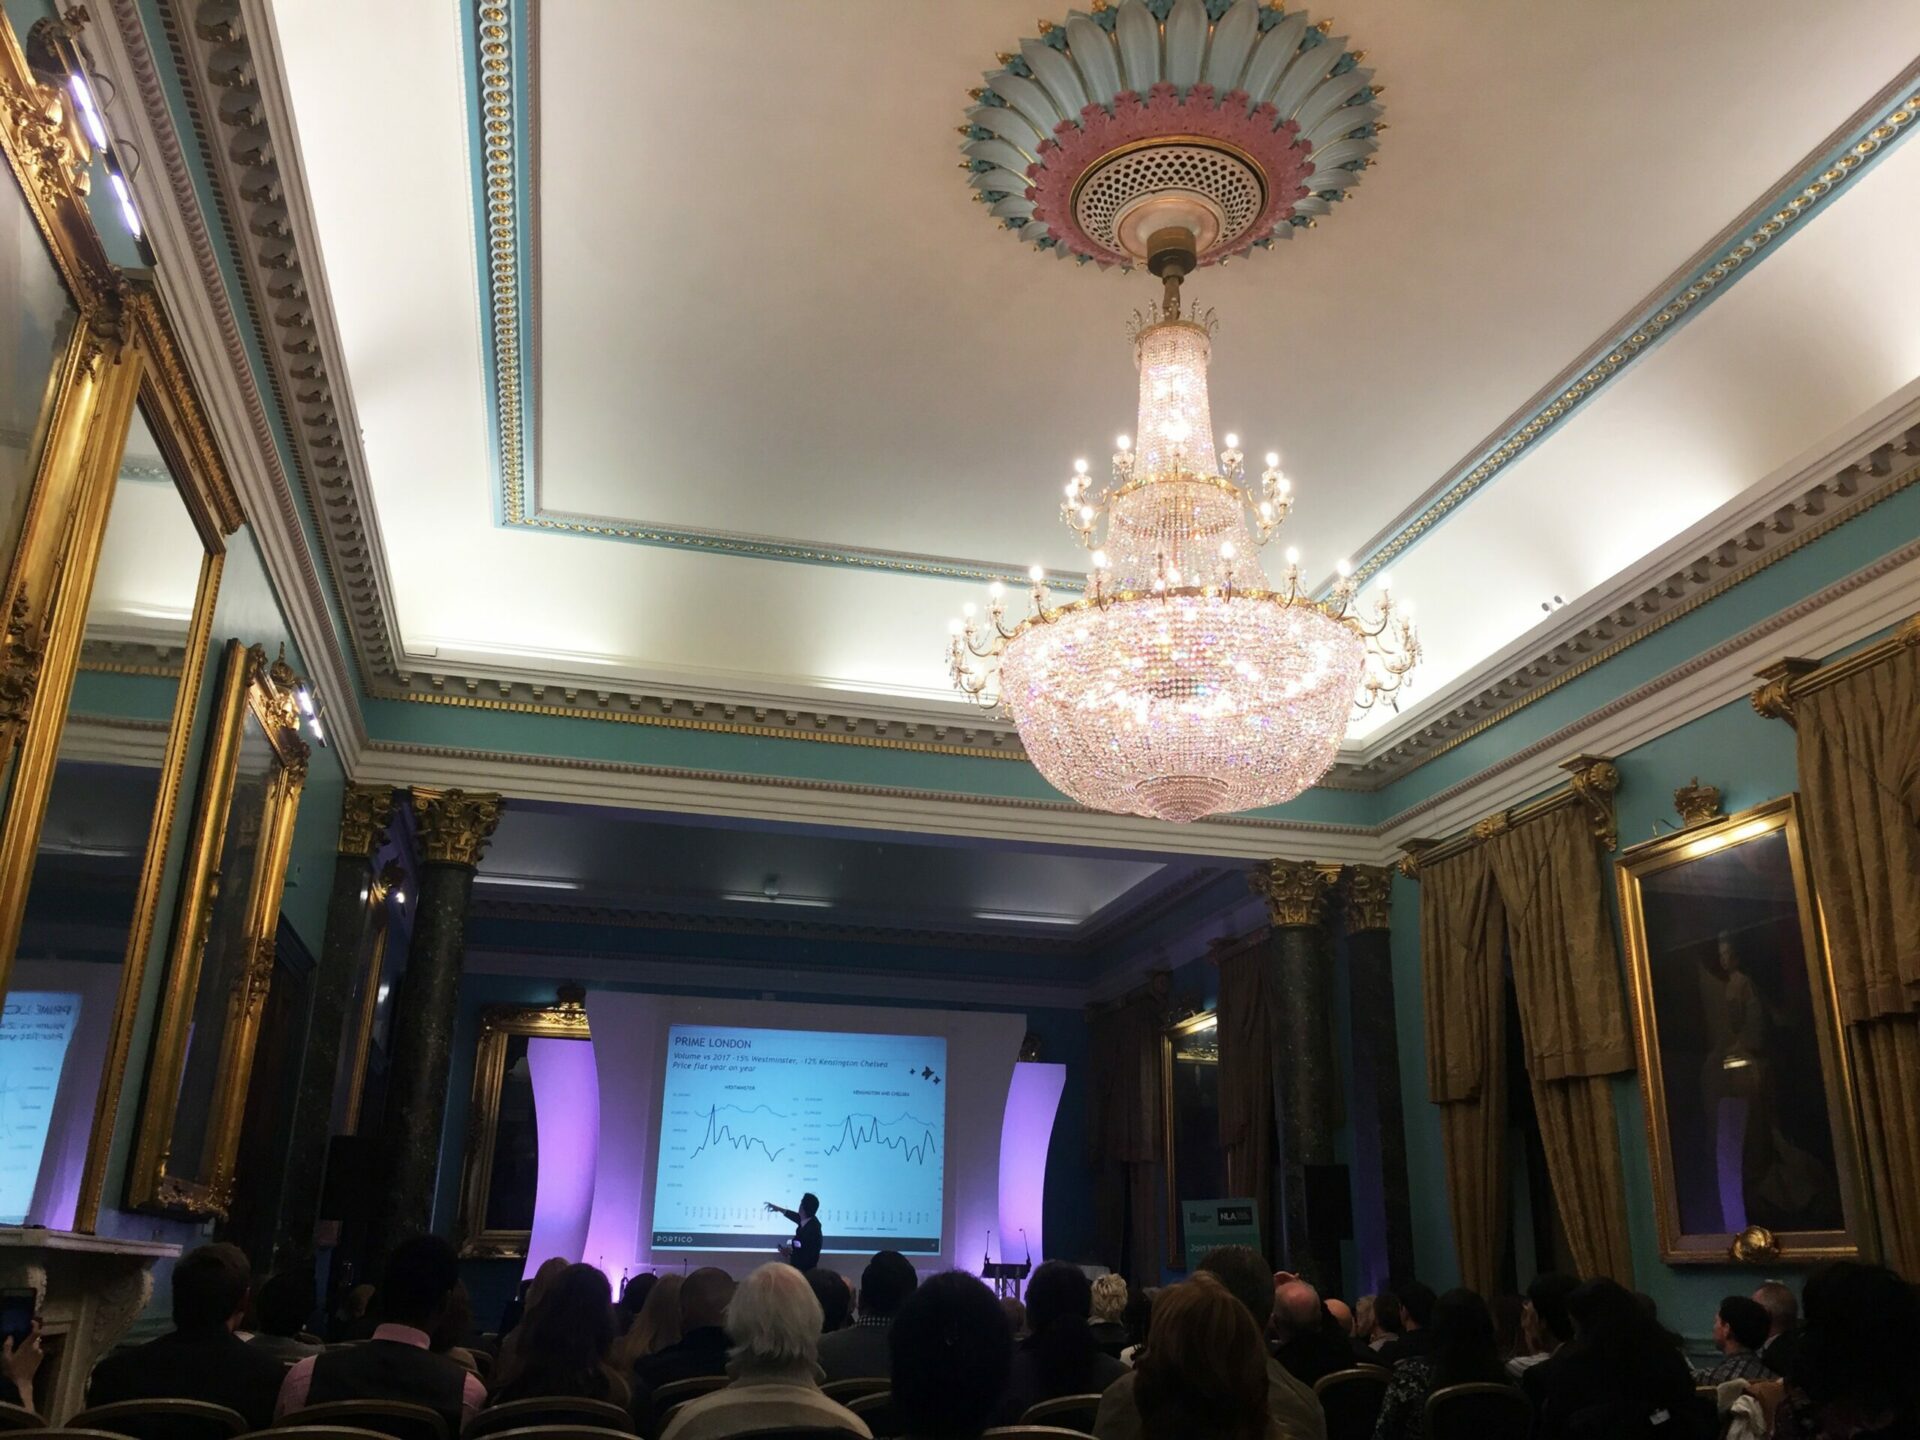 Mark Lawrinson, Regional Director of Portico, presenting at The Institute of Directors, Pall Mall, London.